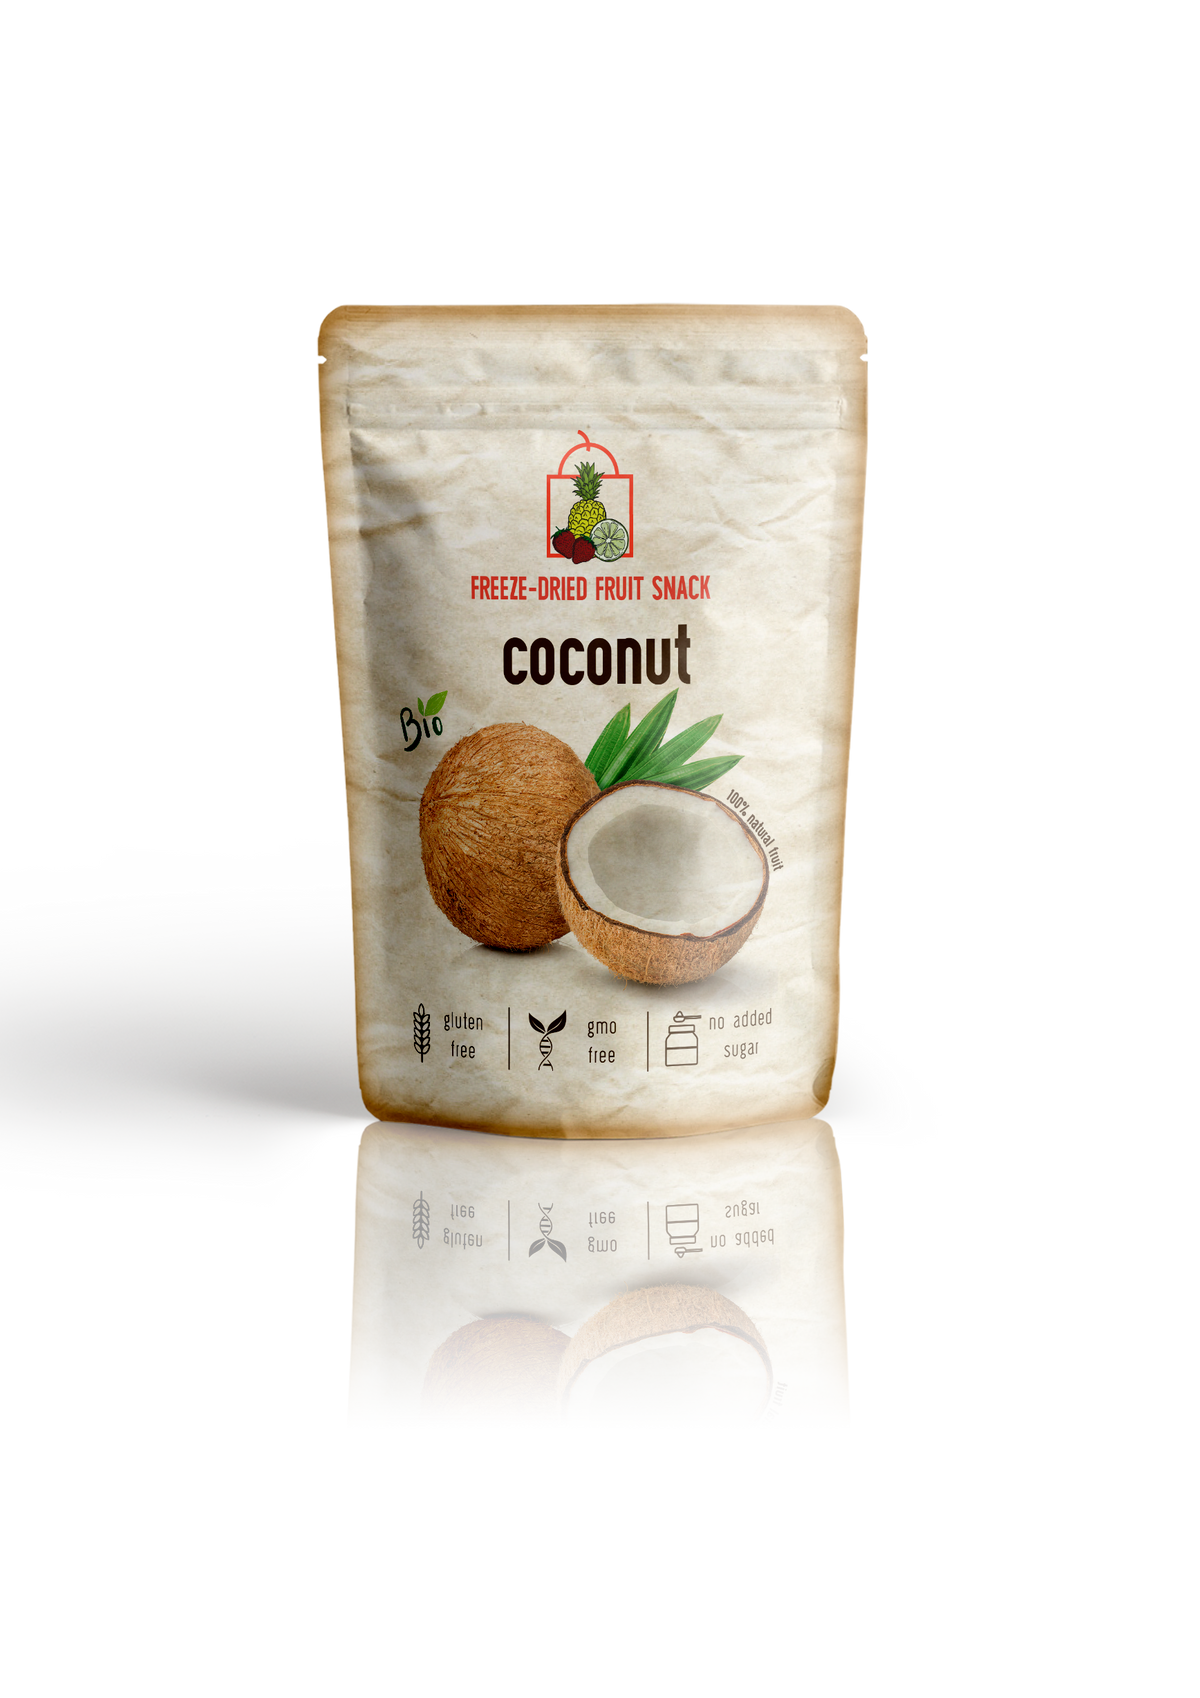 Freeze-Dried Organic Coconut Snack by The Rotten Fruit Box